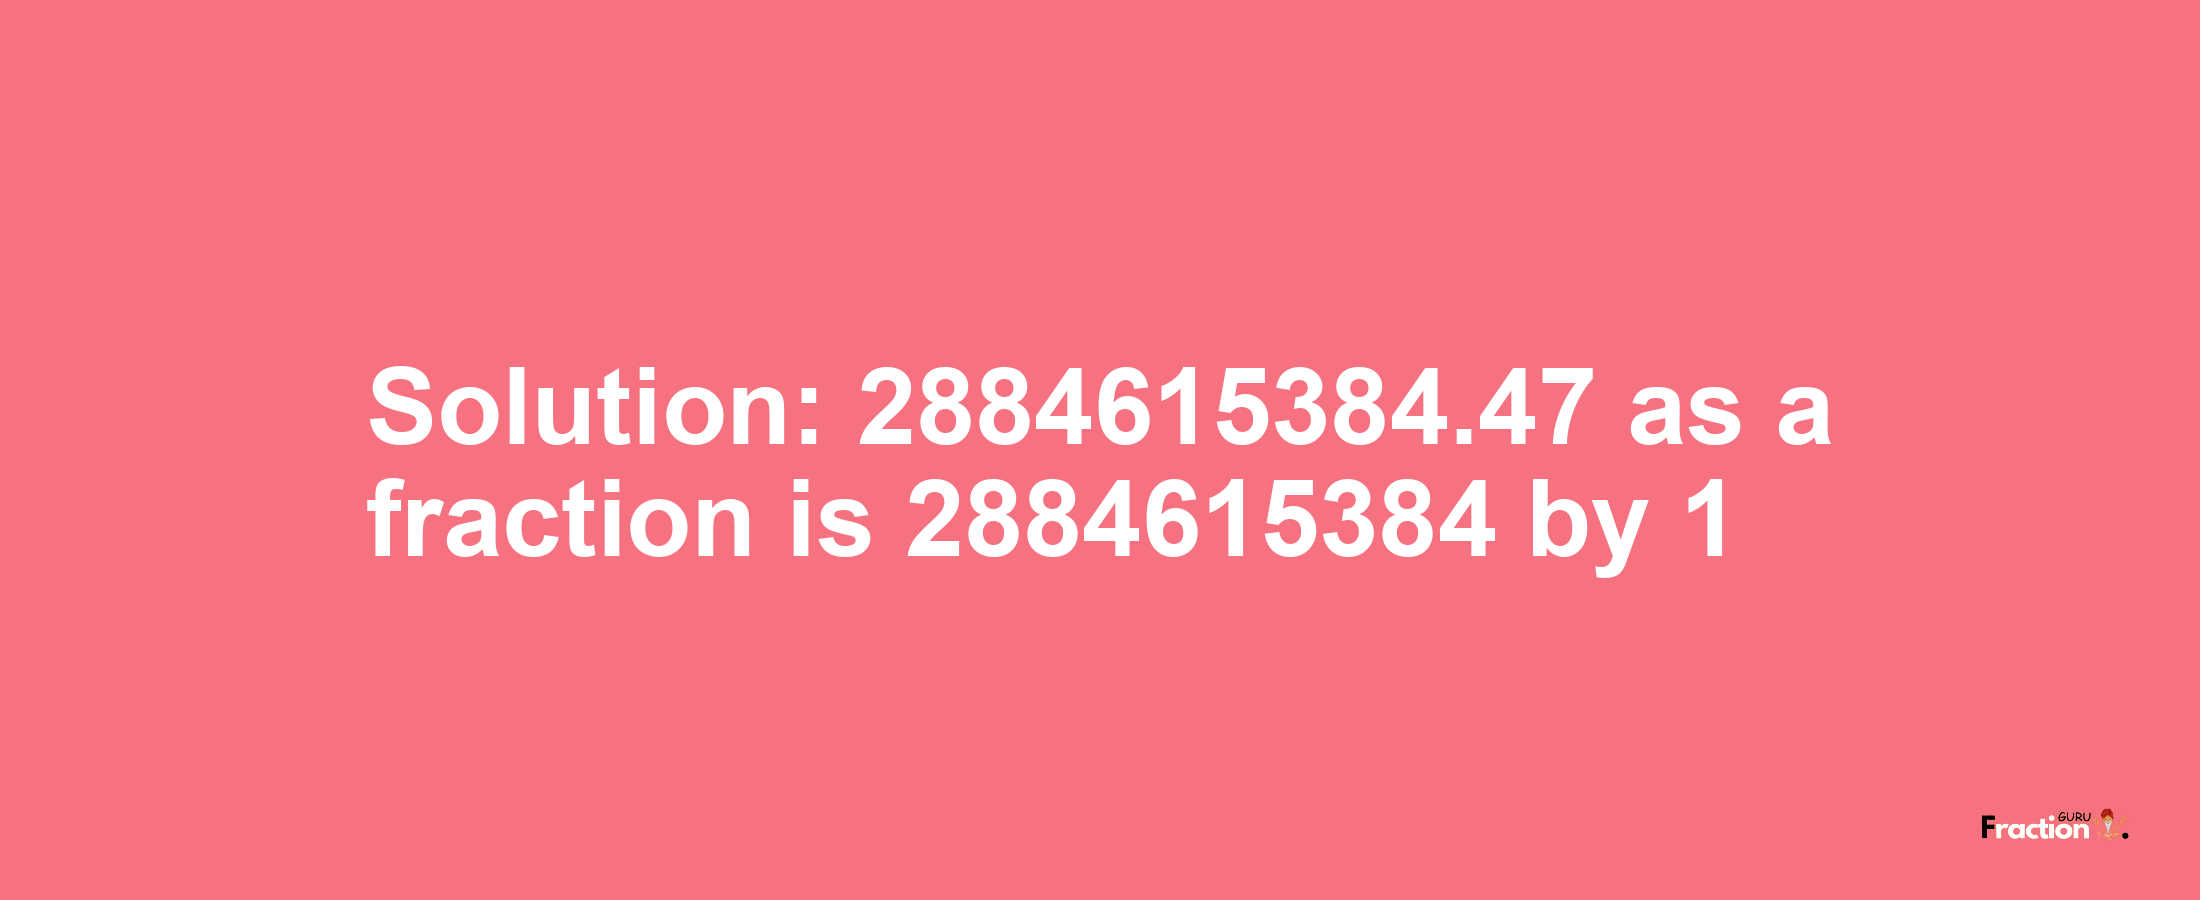 Solution:2884615384.47 as a fraction is 2884615384/1